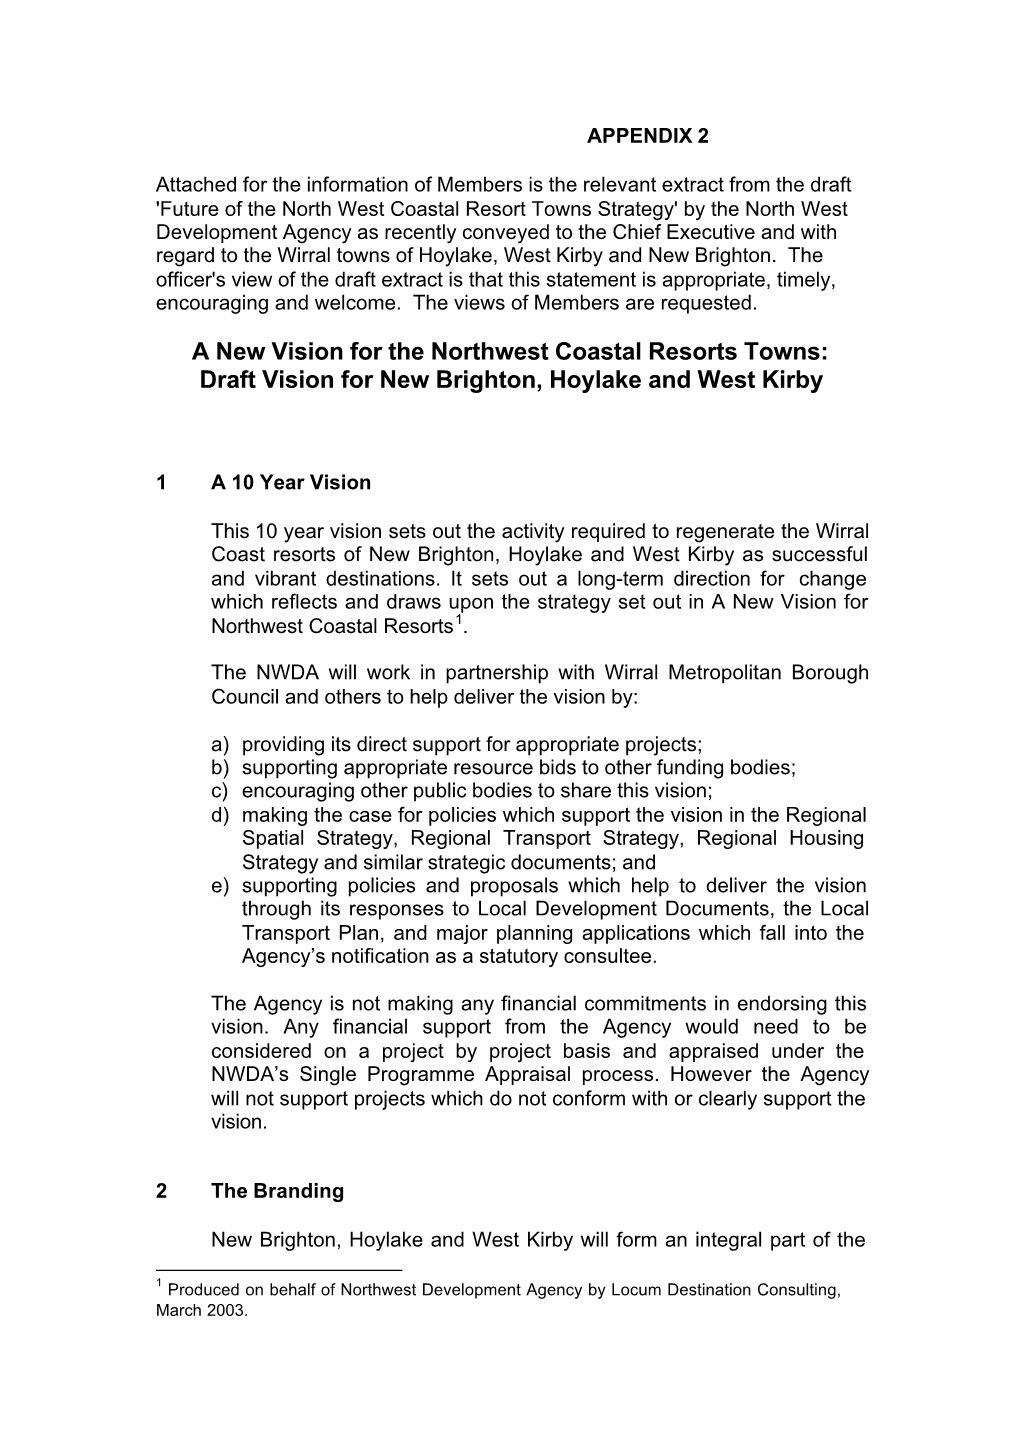 Draft Vision for New Brighton, Hoylake and West Kirby